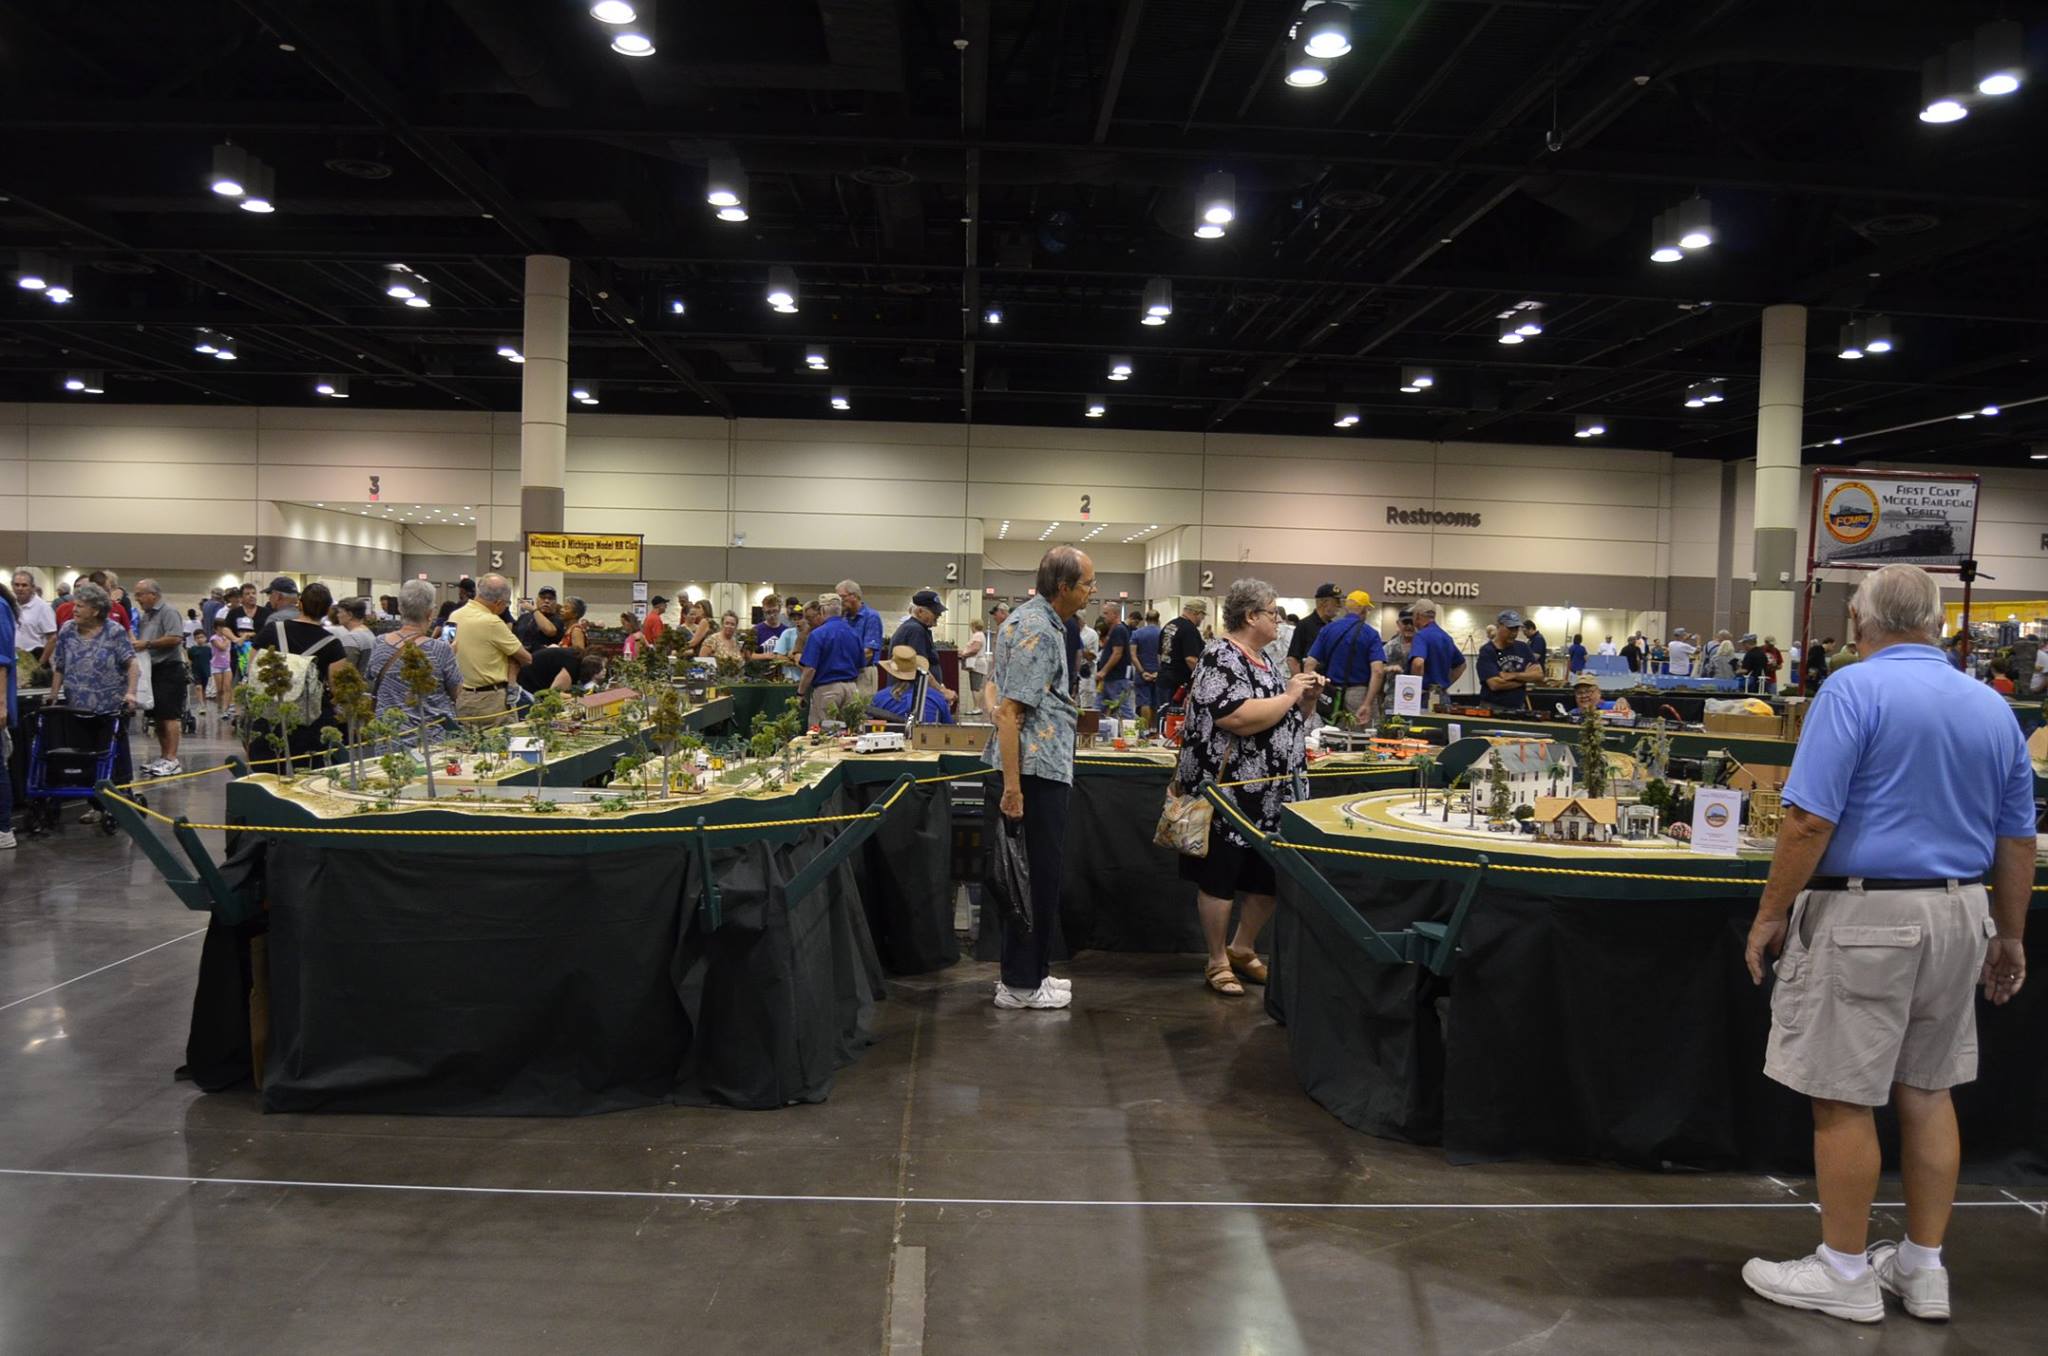 Part of the layout for the 2017 National Train Show.